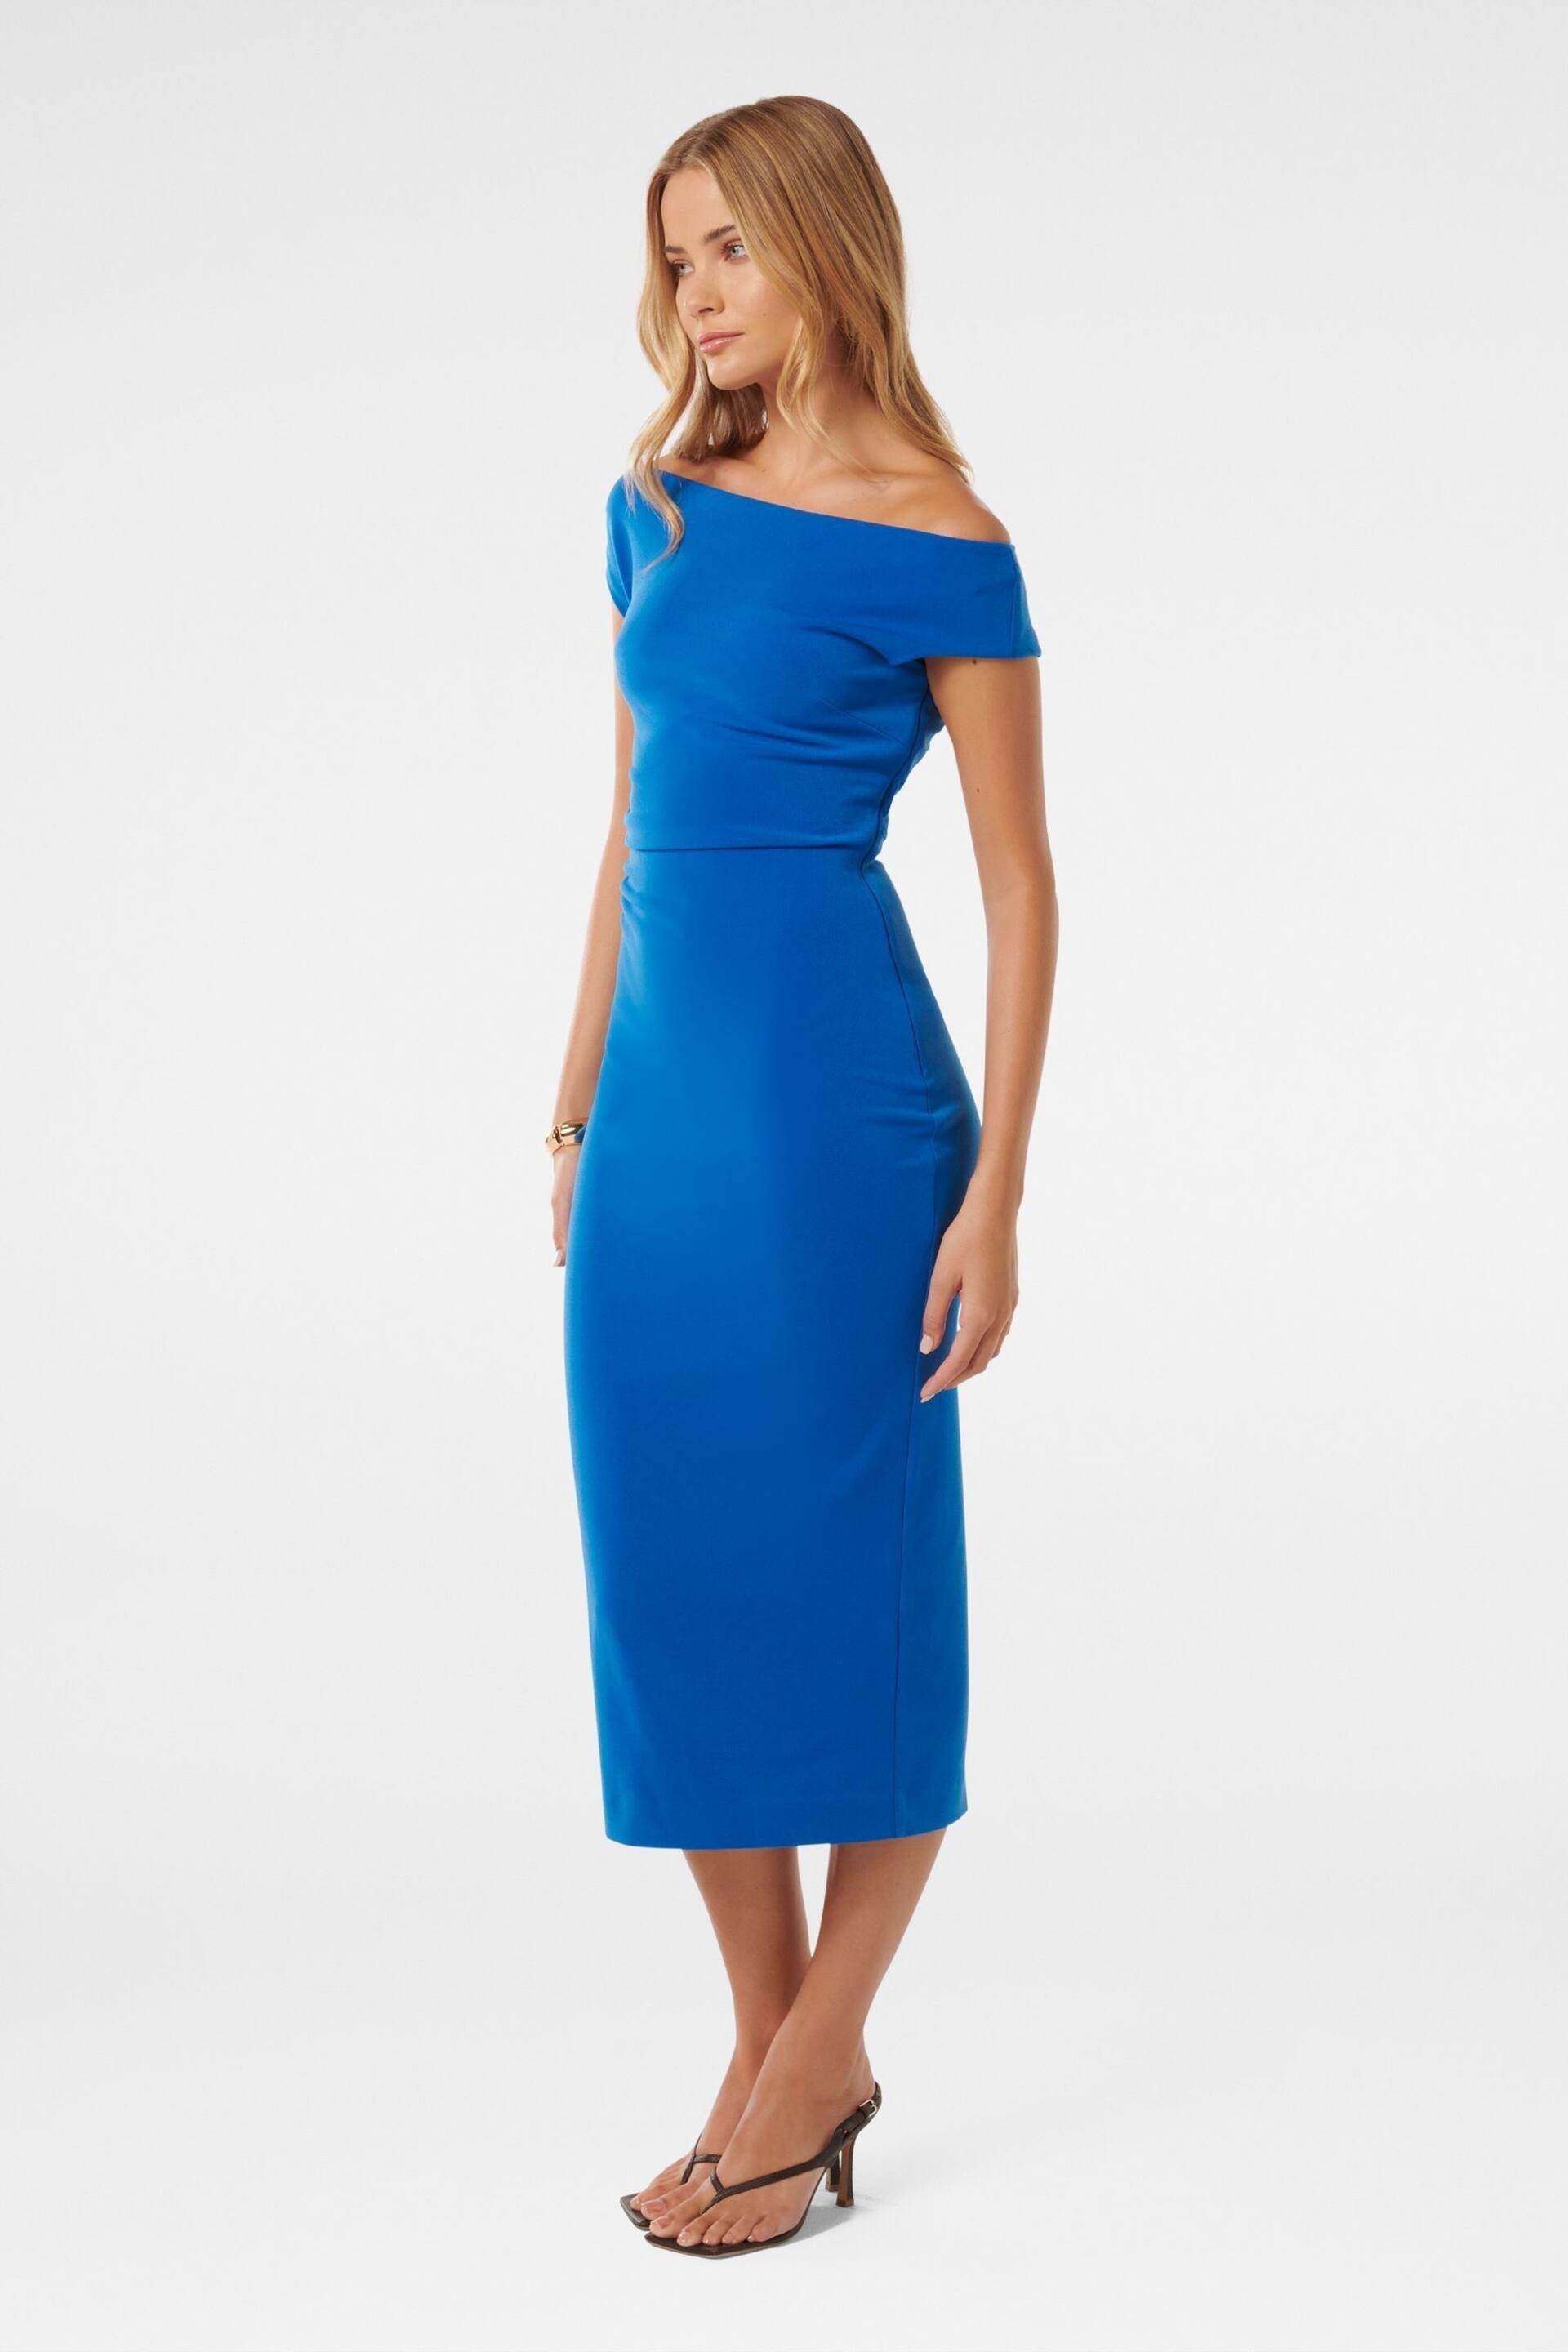 Forever New Blue Alexa Tipped Shoulder Bodycon Midi Dress - Image 3 of 4